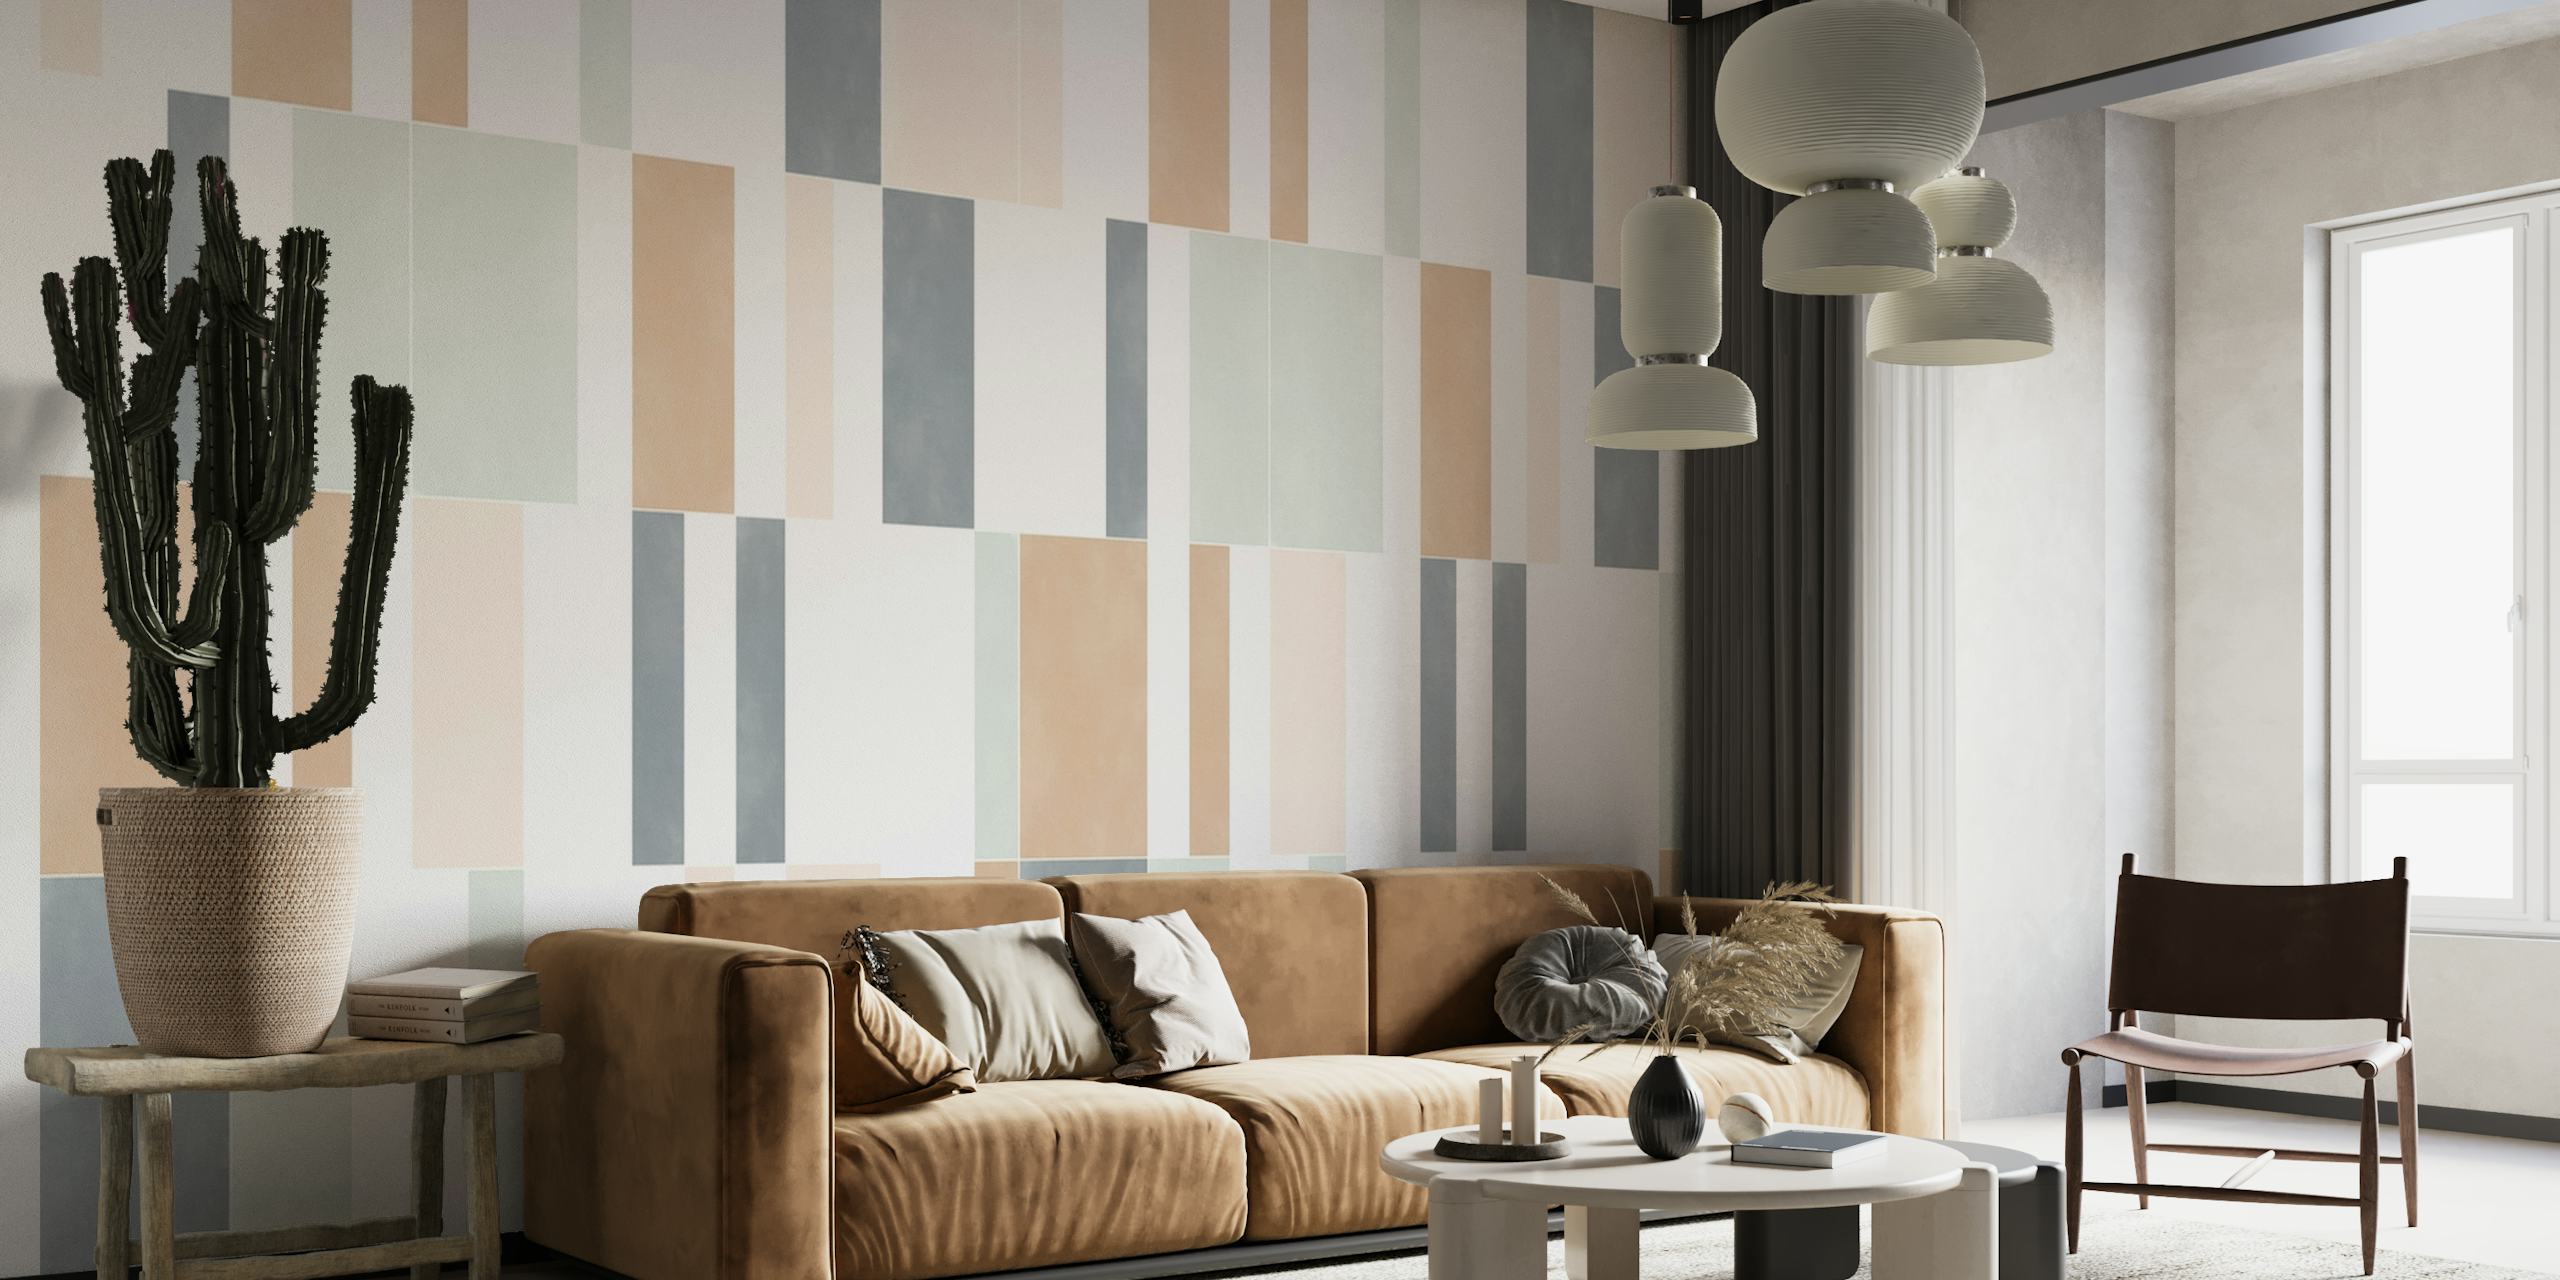 Muted Pastel Tiles One ταπετσαρία